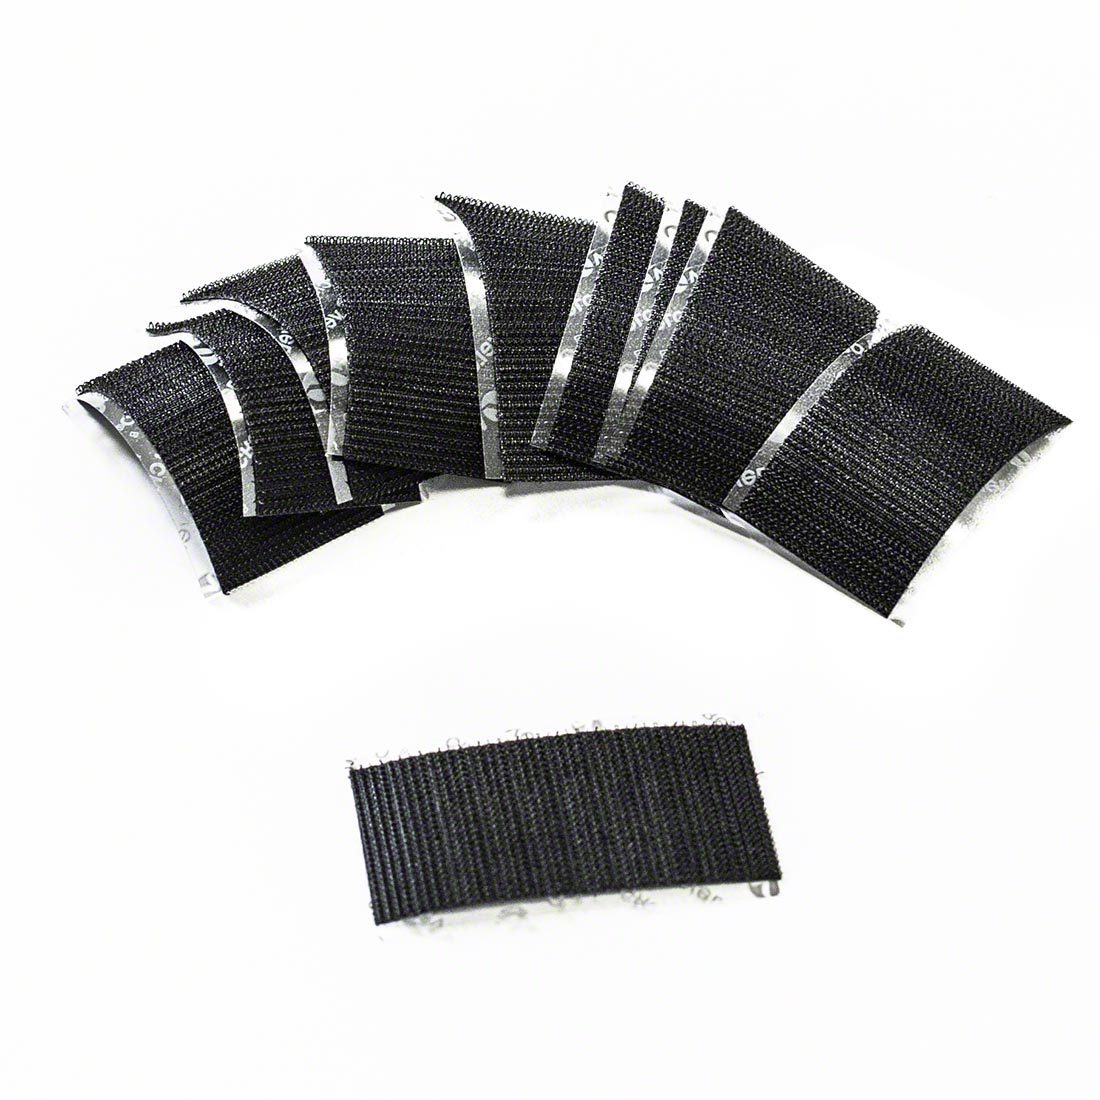 Velcro Tabs for Attaching Skirts to Stage